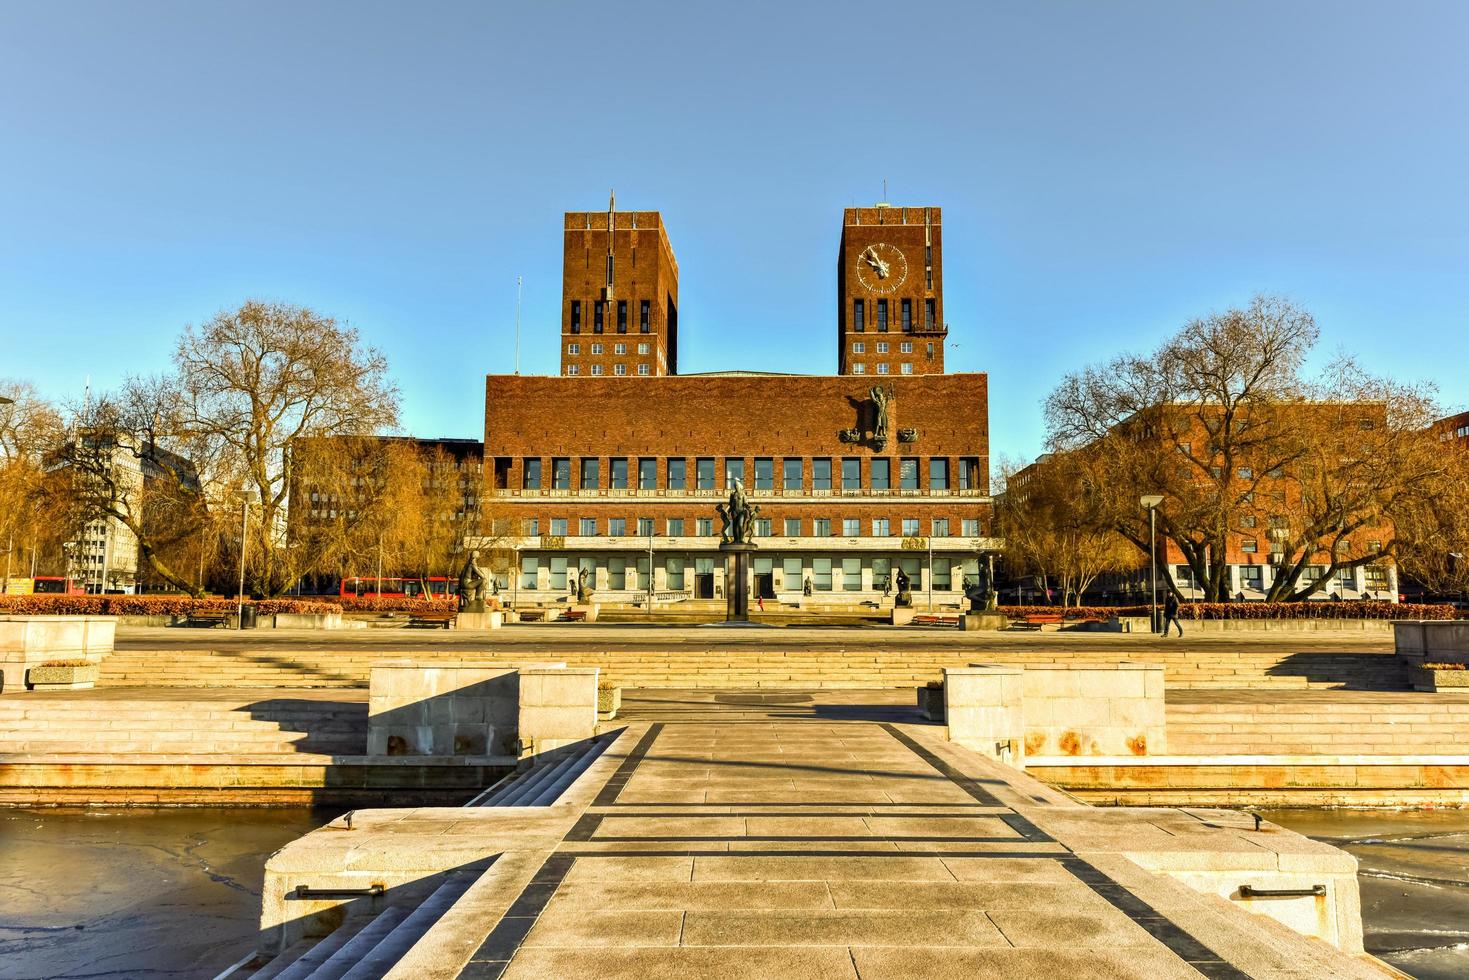 Oslo City Hall houses the city council, city administration, and art studios and galleries. photo